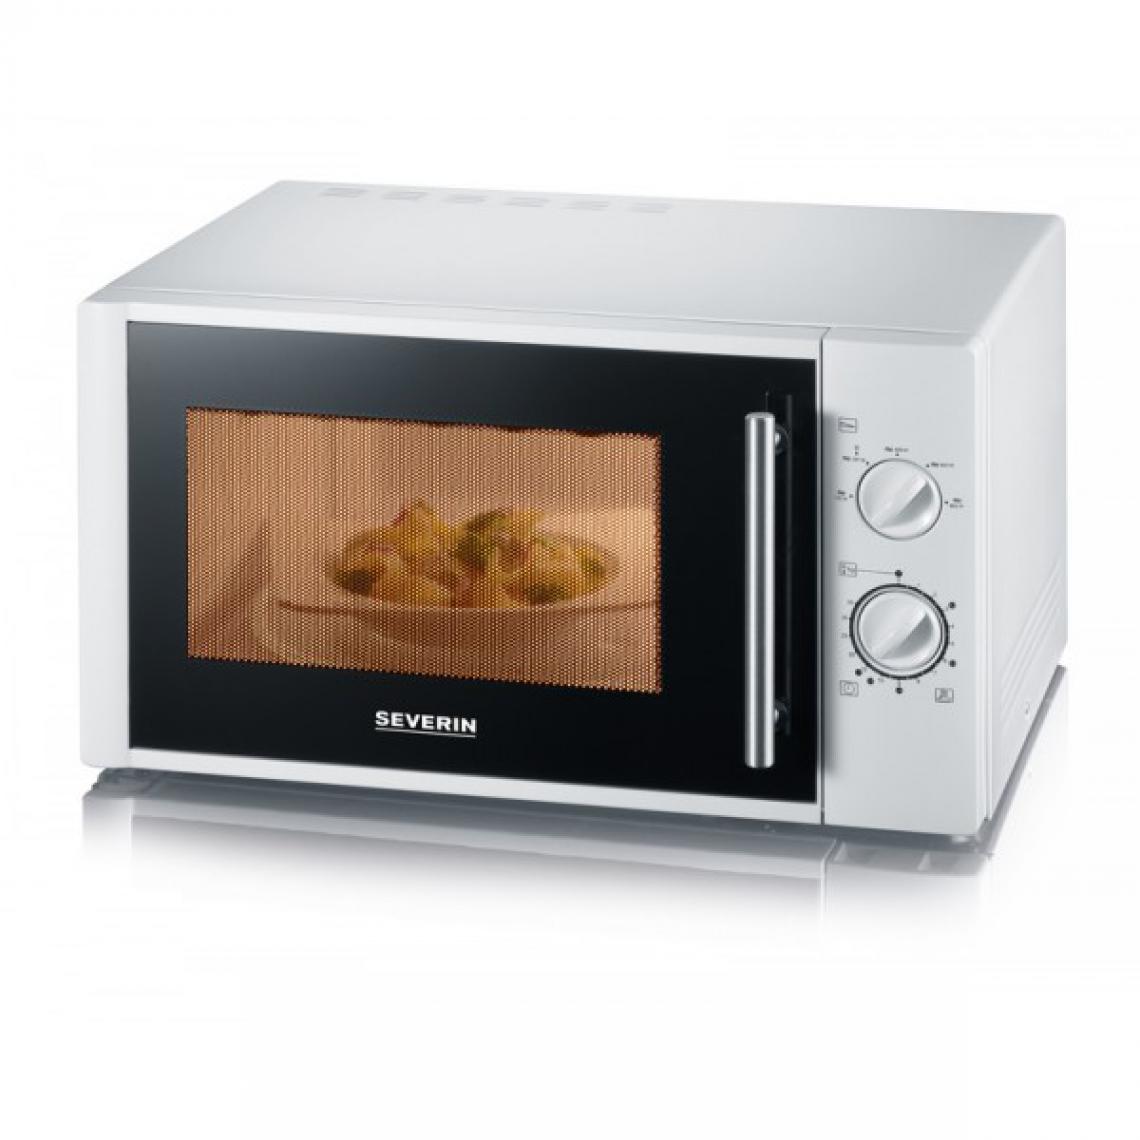 Severin - SEVERIN Micro-Ondes 28 litres blanc MW7873 - Four micro-ondes